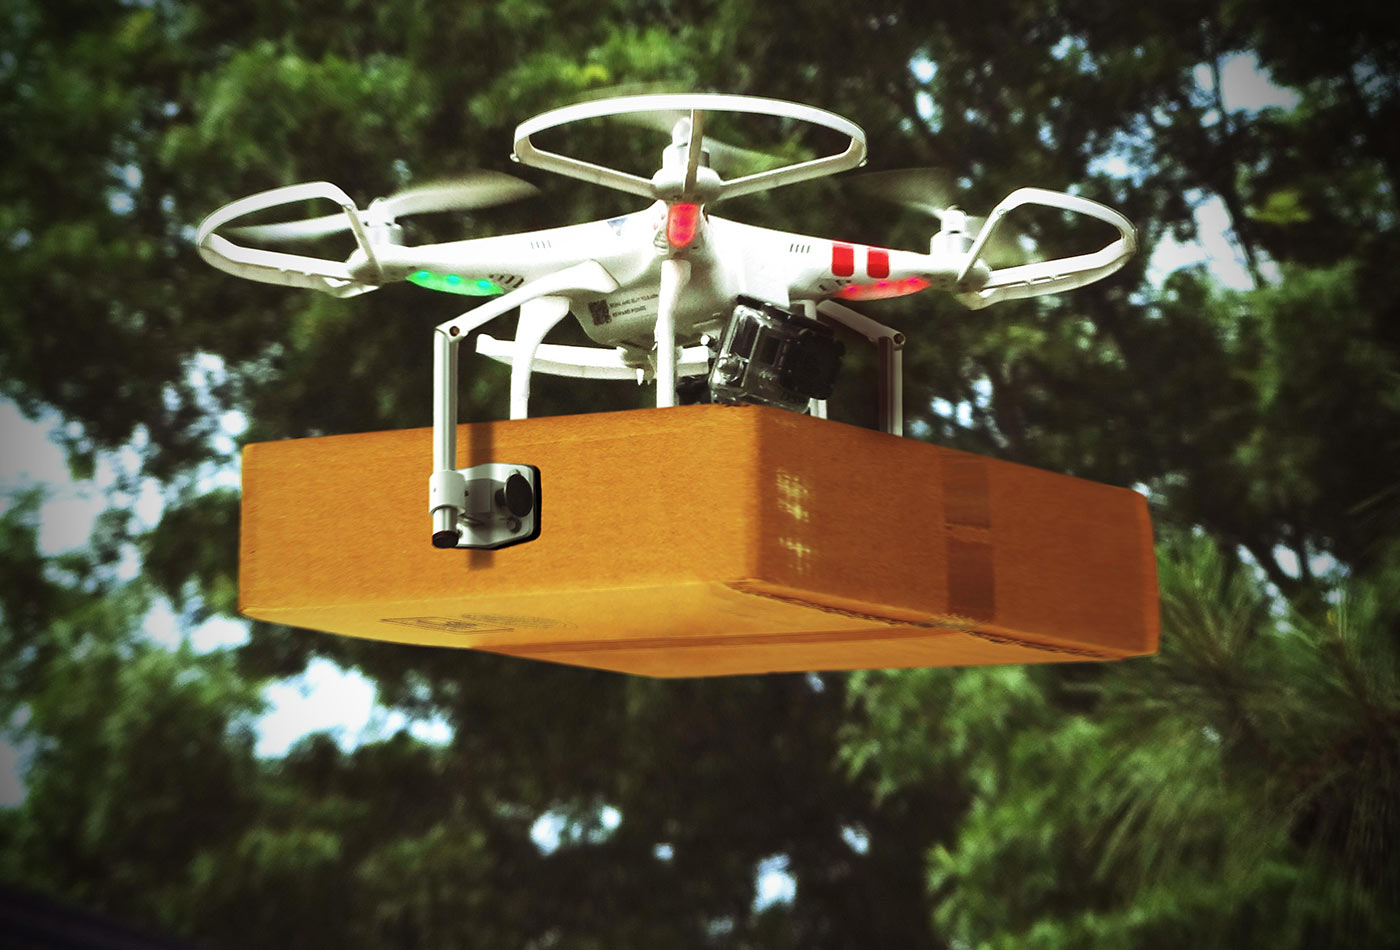 Delivery drone